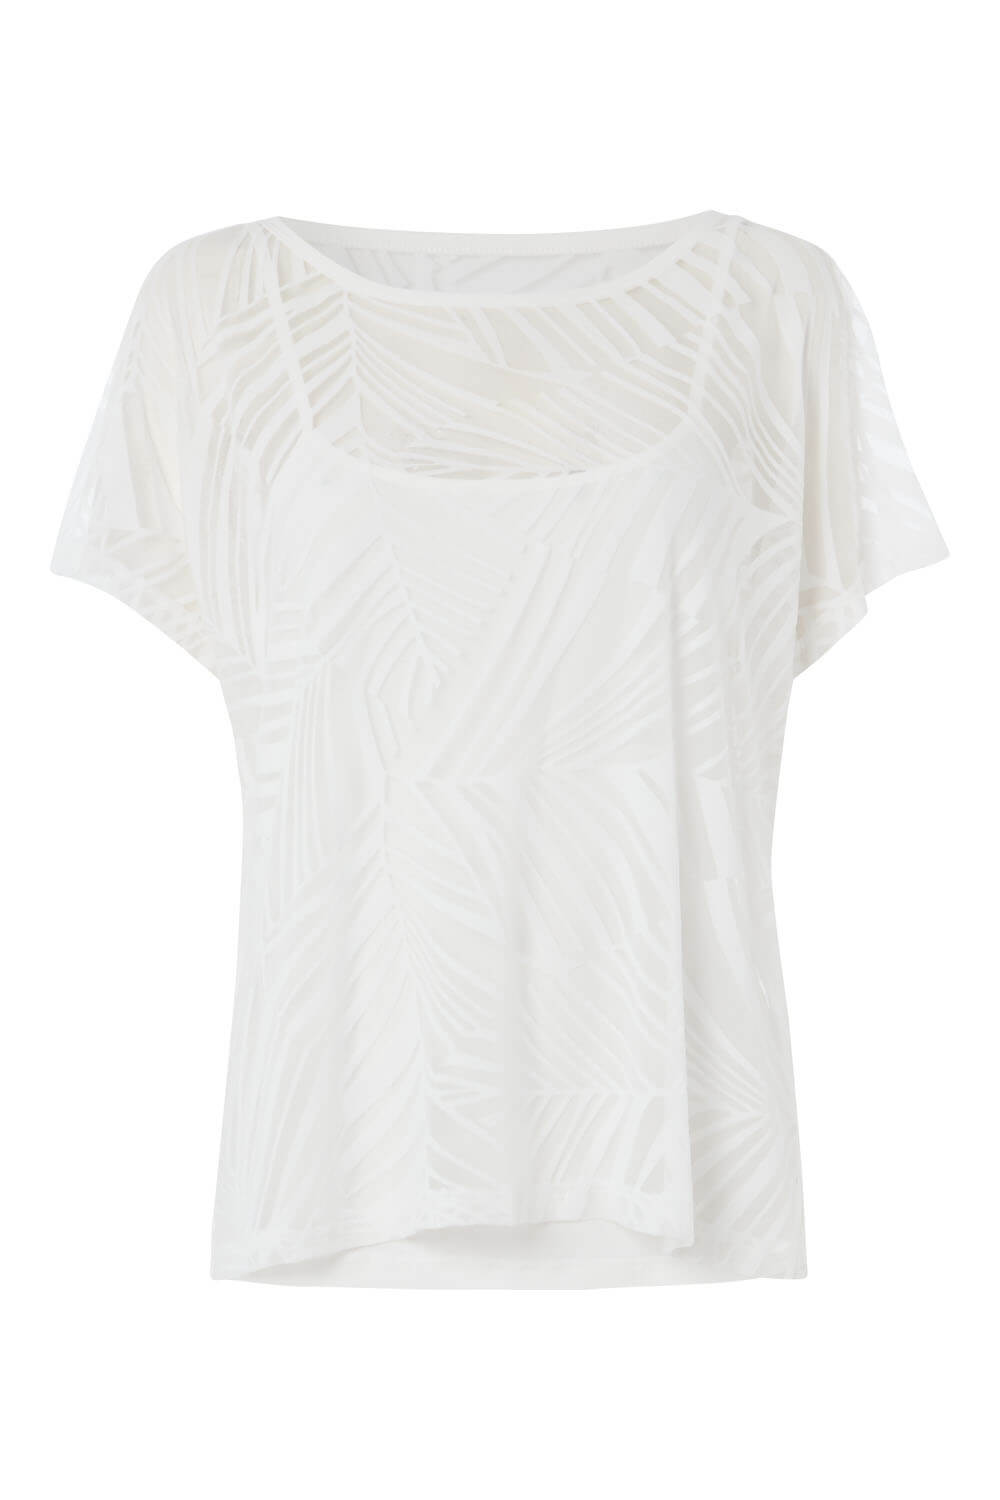 Ivory  Burnout Overlay Top, Image 4 of 8